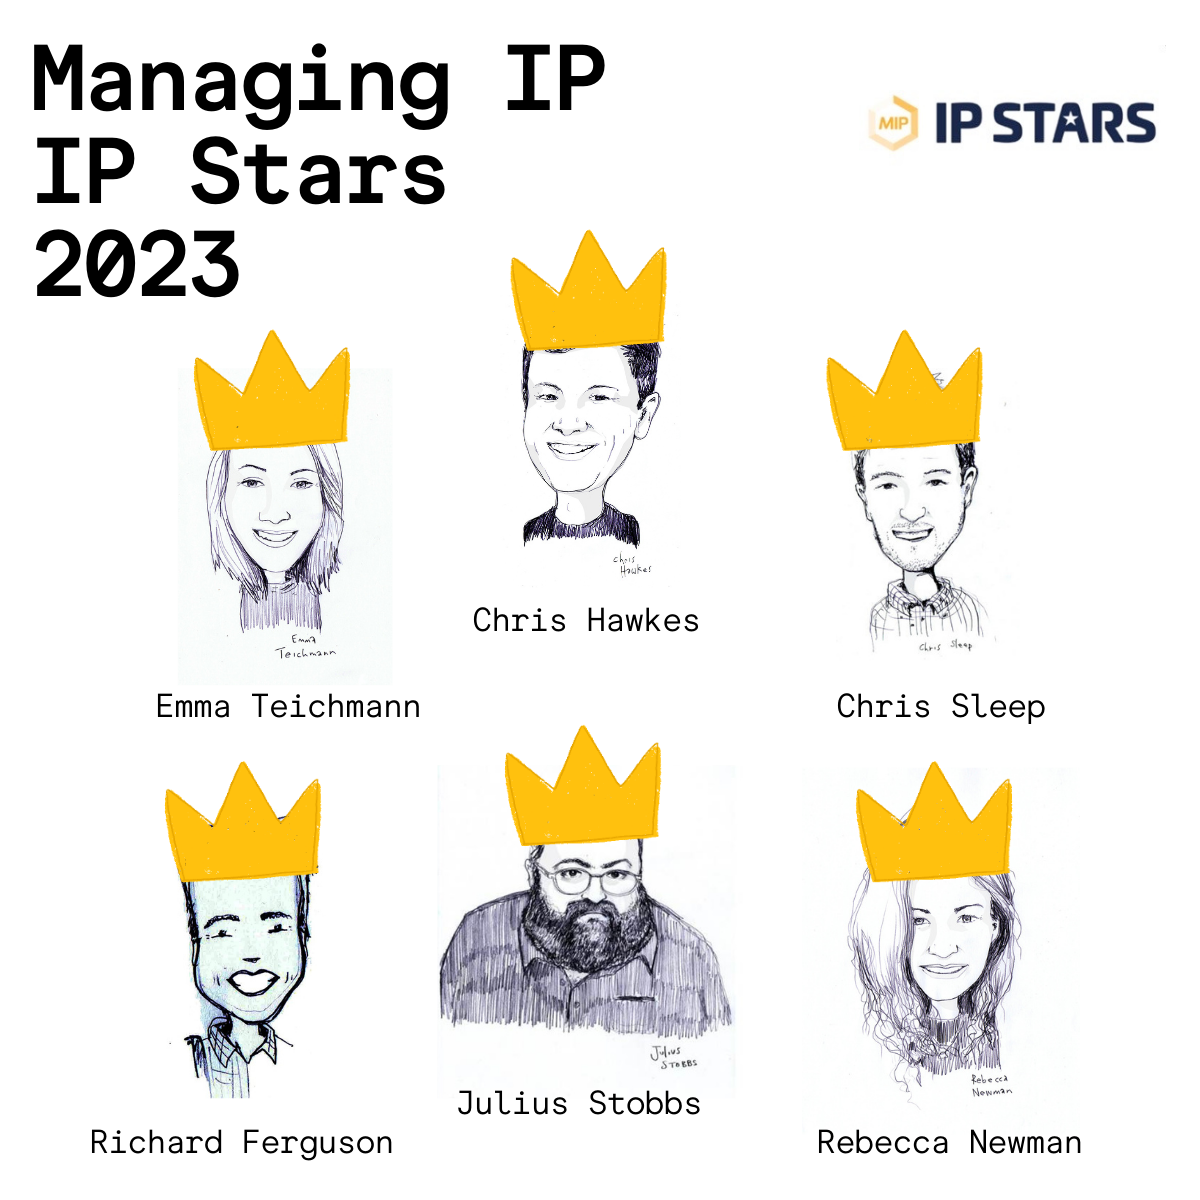 Some Stobbs faces appear amongst the IP Stars spotted by Managing IP